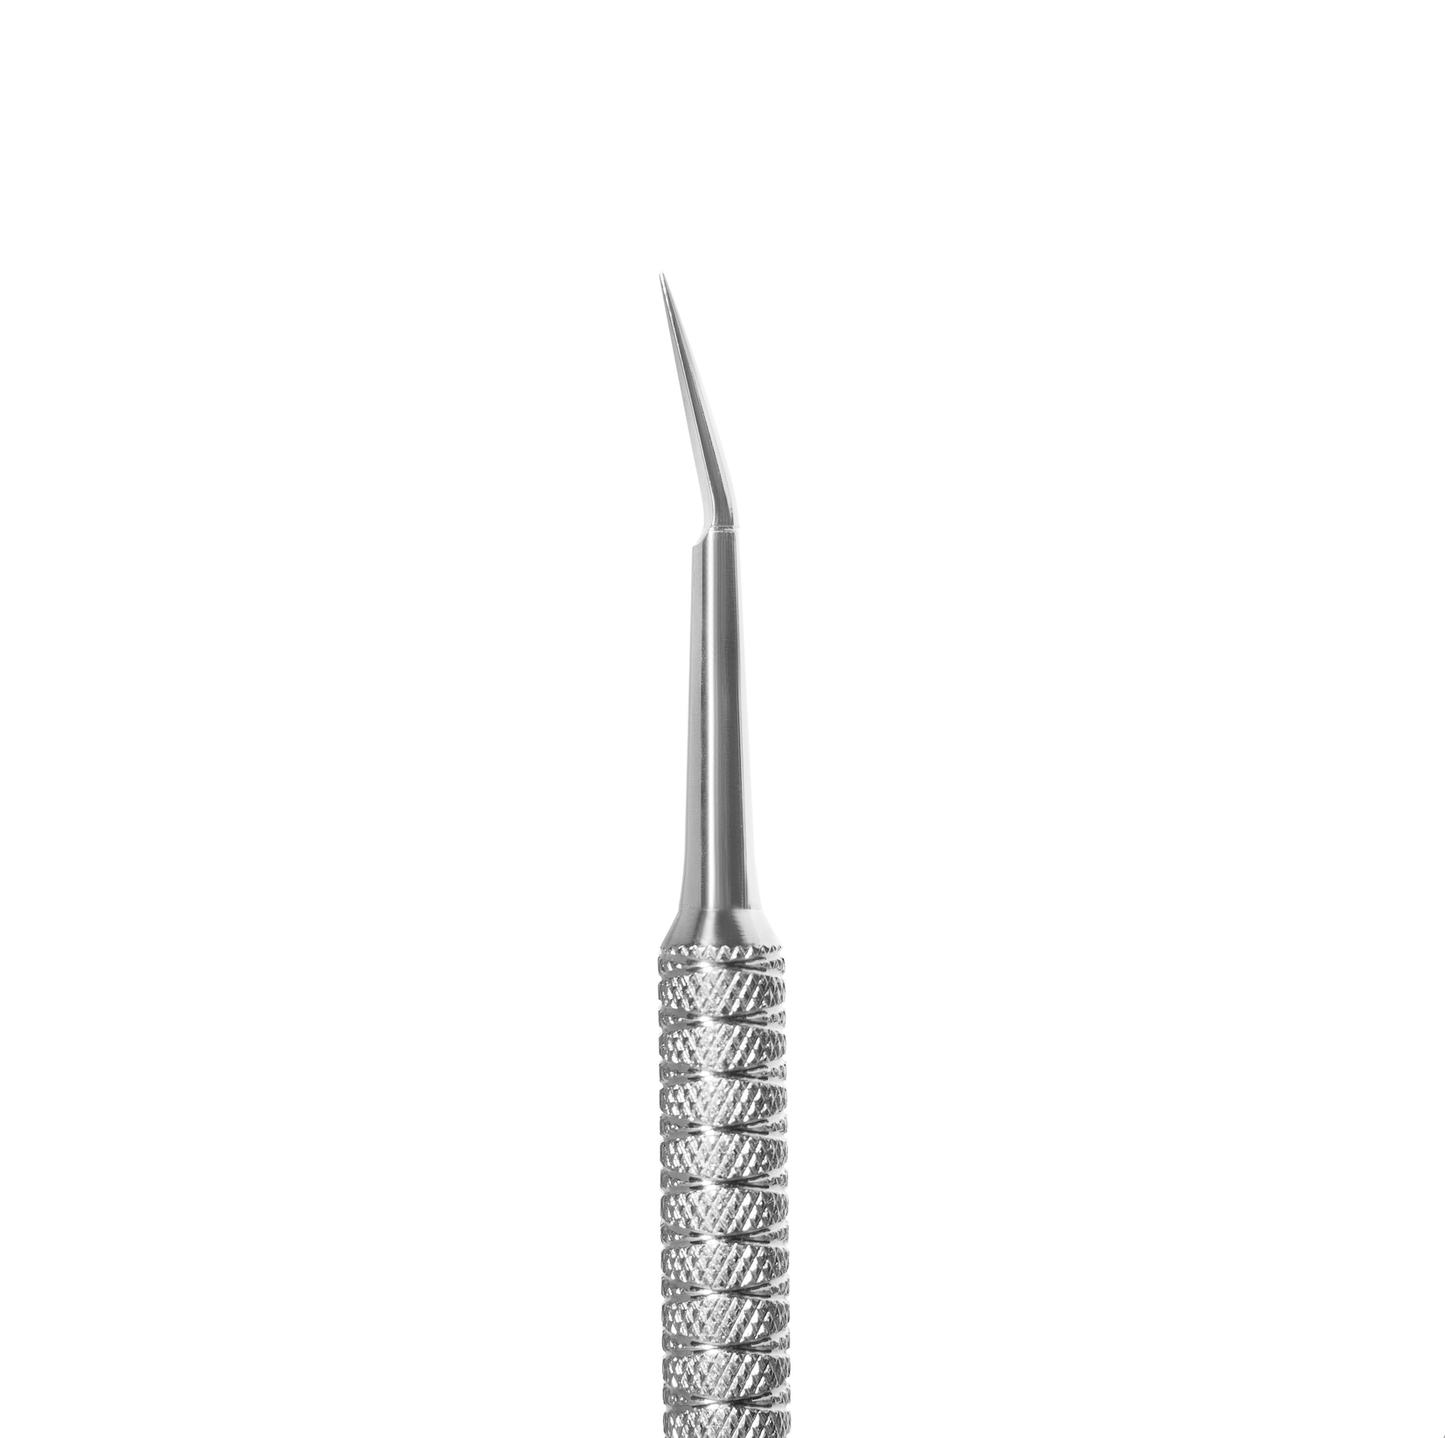 Staleks Pedicure pusher tool EXPERT 20 TYPE 1 (hemisphere curette and cleaner) - F.O.X Nails USA